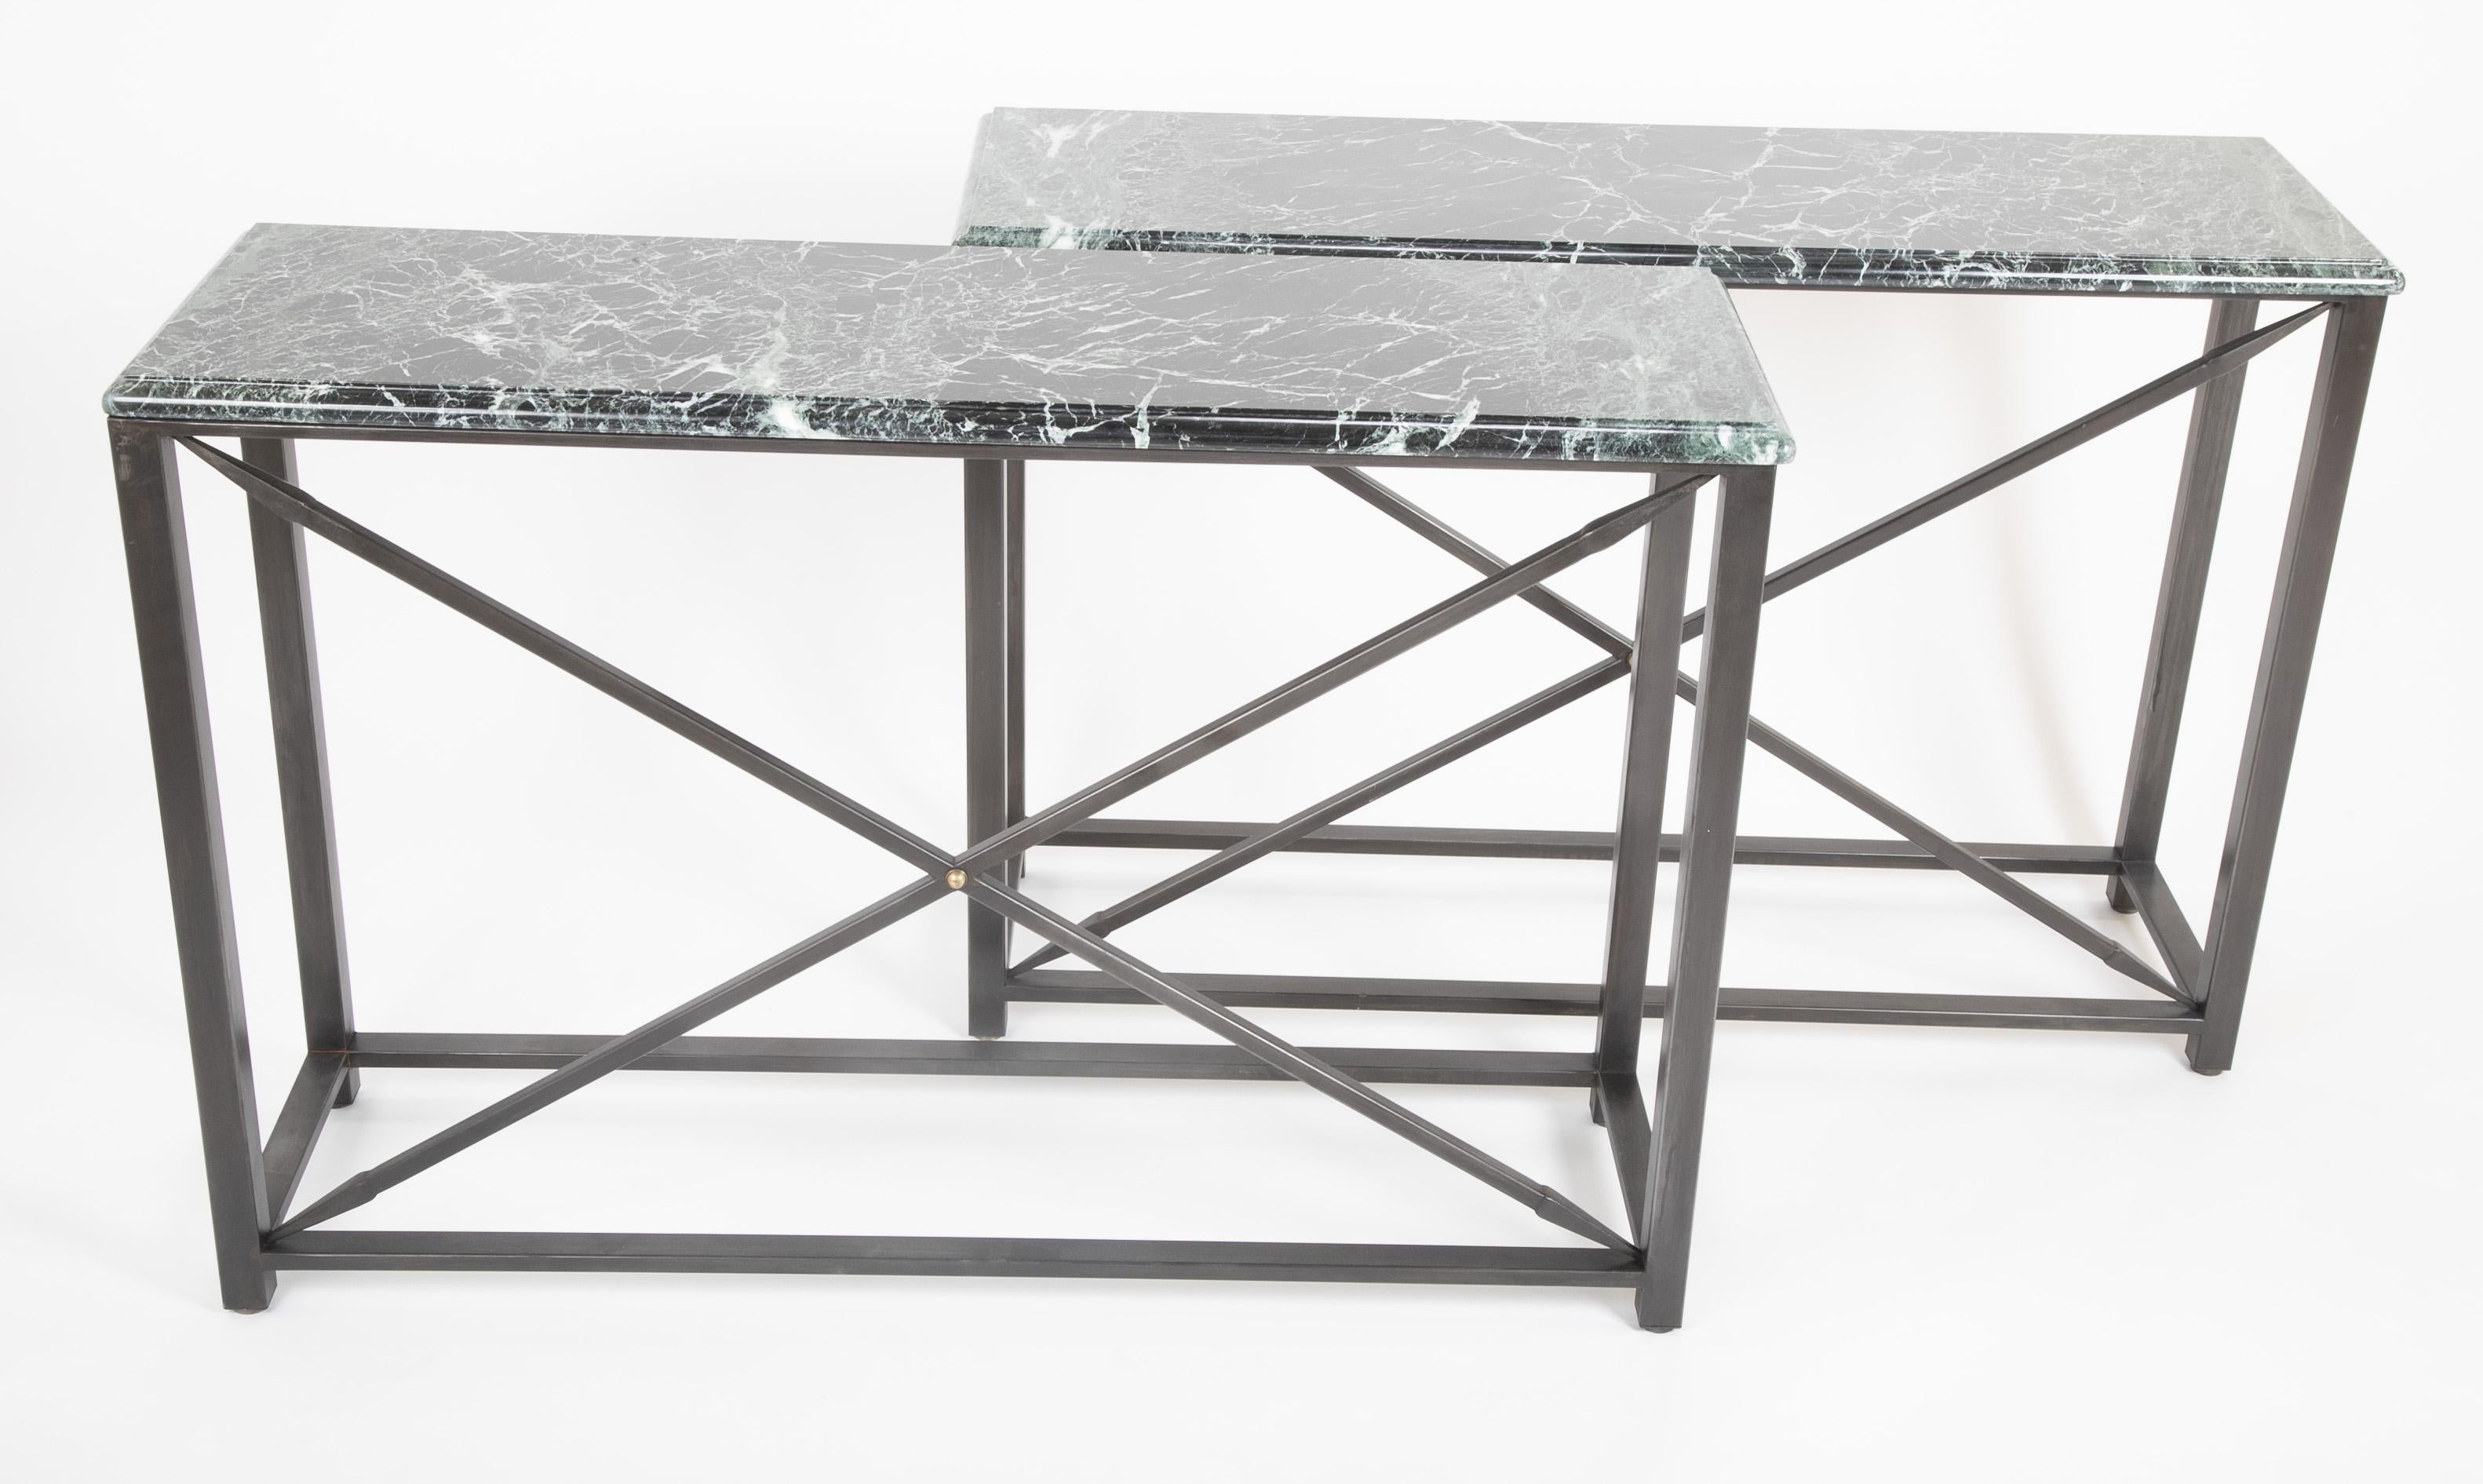 20th Century Pair of Neoclassical Style Steel Console Tables with Green Marble Tops For Sale